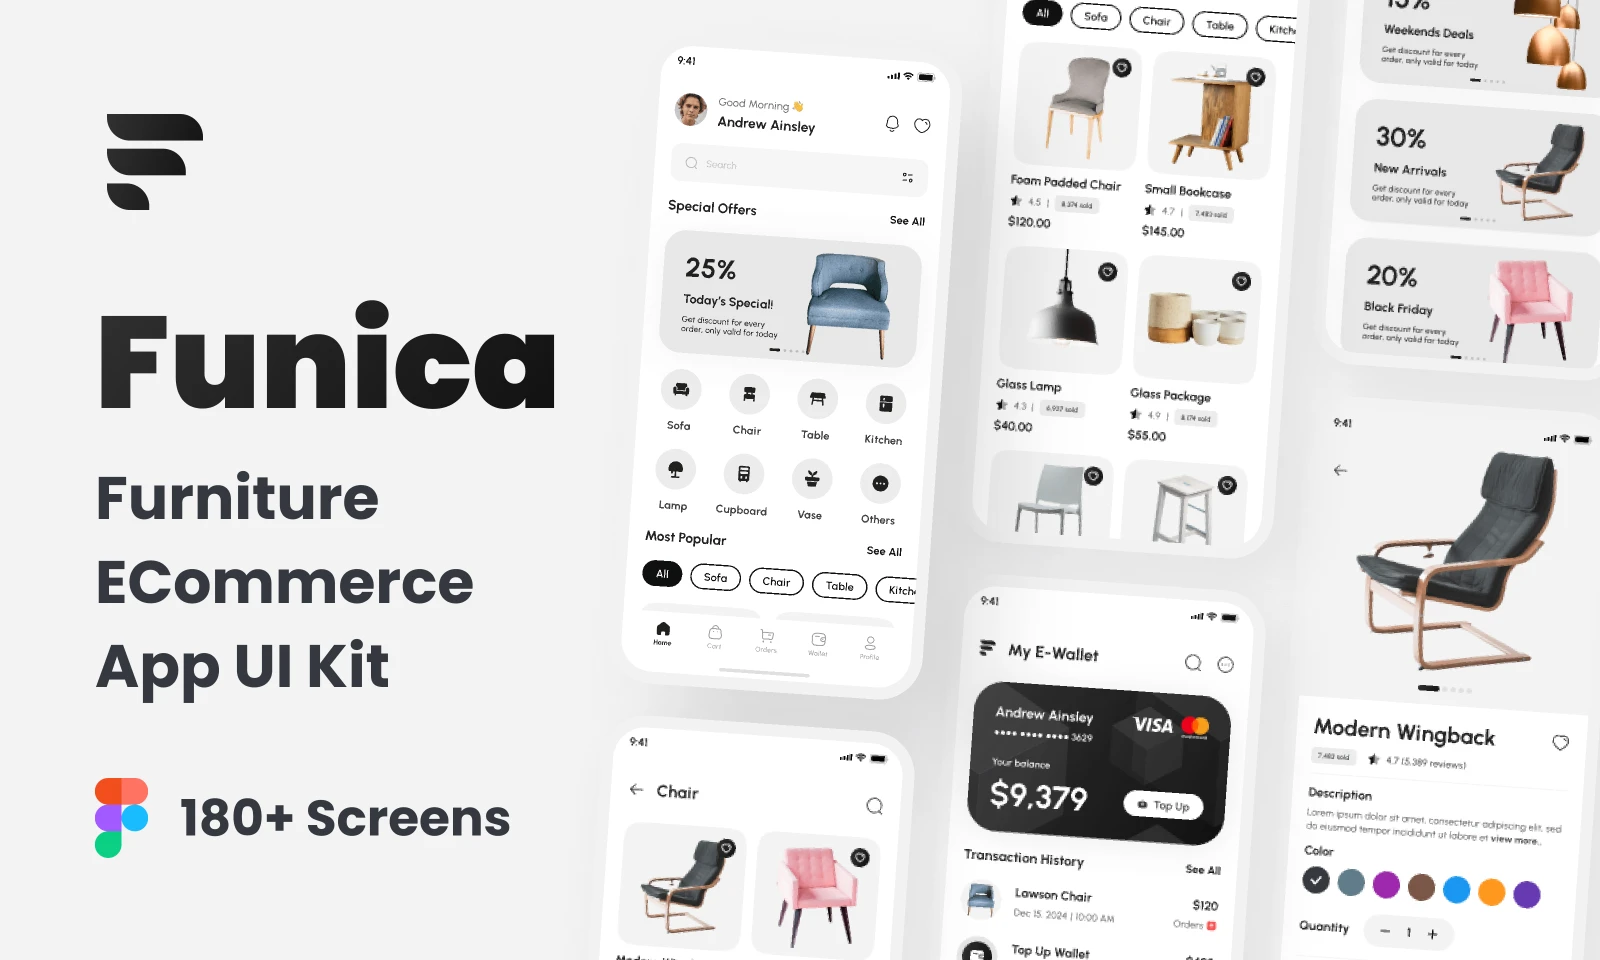 Funica - Furniture E-Commerce App UI Kit for Figma and Adobe XD